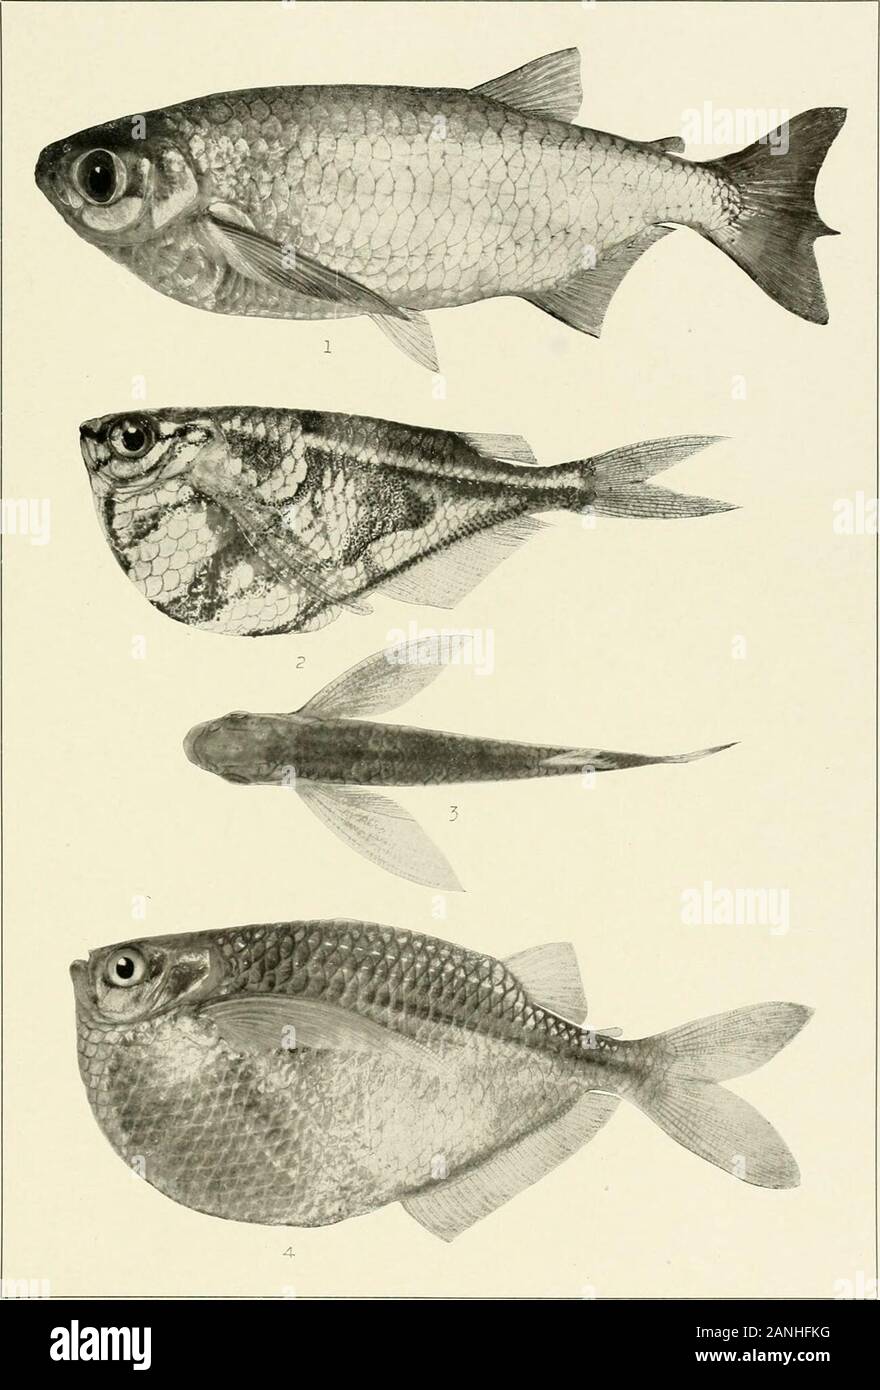 The freshwater fishes of British Guiana, including a study of the ecological grouping of species and the relation of the fauna of the plateau to that of the lowlands . ::?-?. 1. Holobrycon pesu (Muller and Troschel). 150 mm. I. I. No. 12,105. -. Brycon falcatus Mulleh andTroschel. 225 mm. No. IMS. :;. Brycon siebenthala Eigenmann. (Type.) 204 mm. No. 1819. Memoirs Carnegie Museum, Vol. V. Plate LV.. 1. Chalcinics rotundatus (Schomburgk). 186 mm. No. 2059a. 2. Carnegiella strigata (Gunther).41 nun. No. 1296. 3. Carnegiella strigata (Gunther). 41 mm. No. 1296. 4. Gasteropelecus stemida(LesNjEUs) Stock Photo